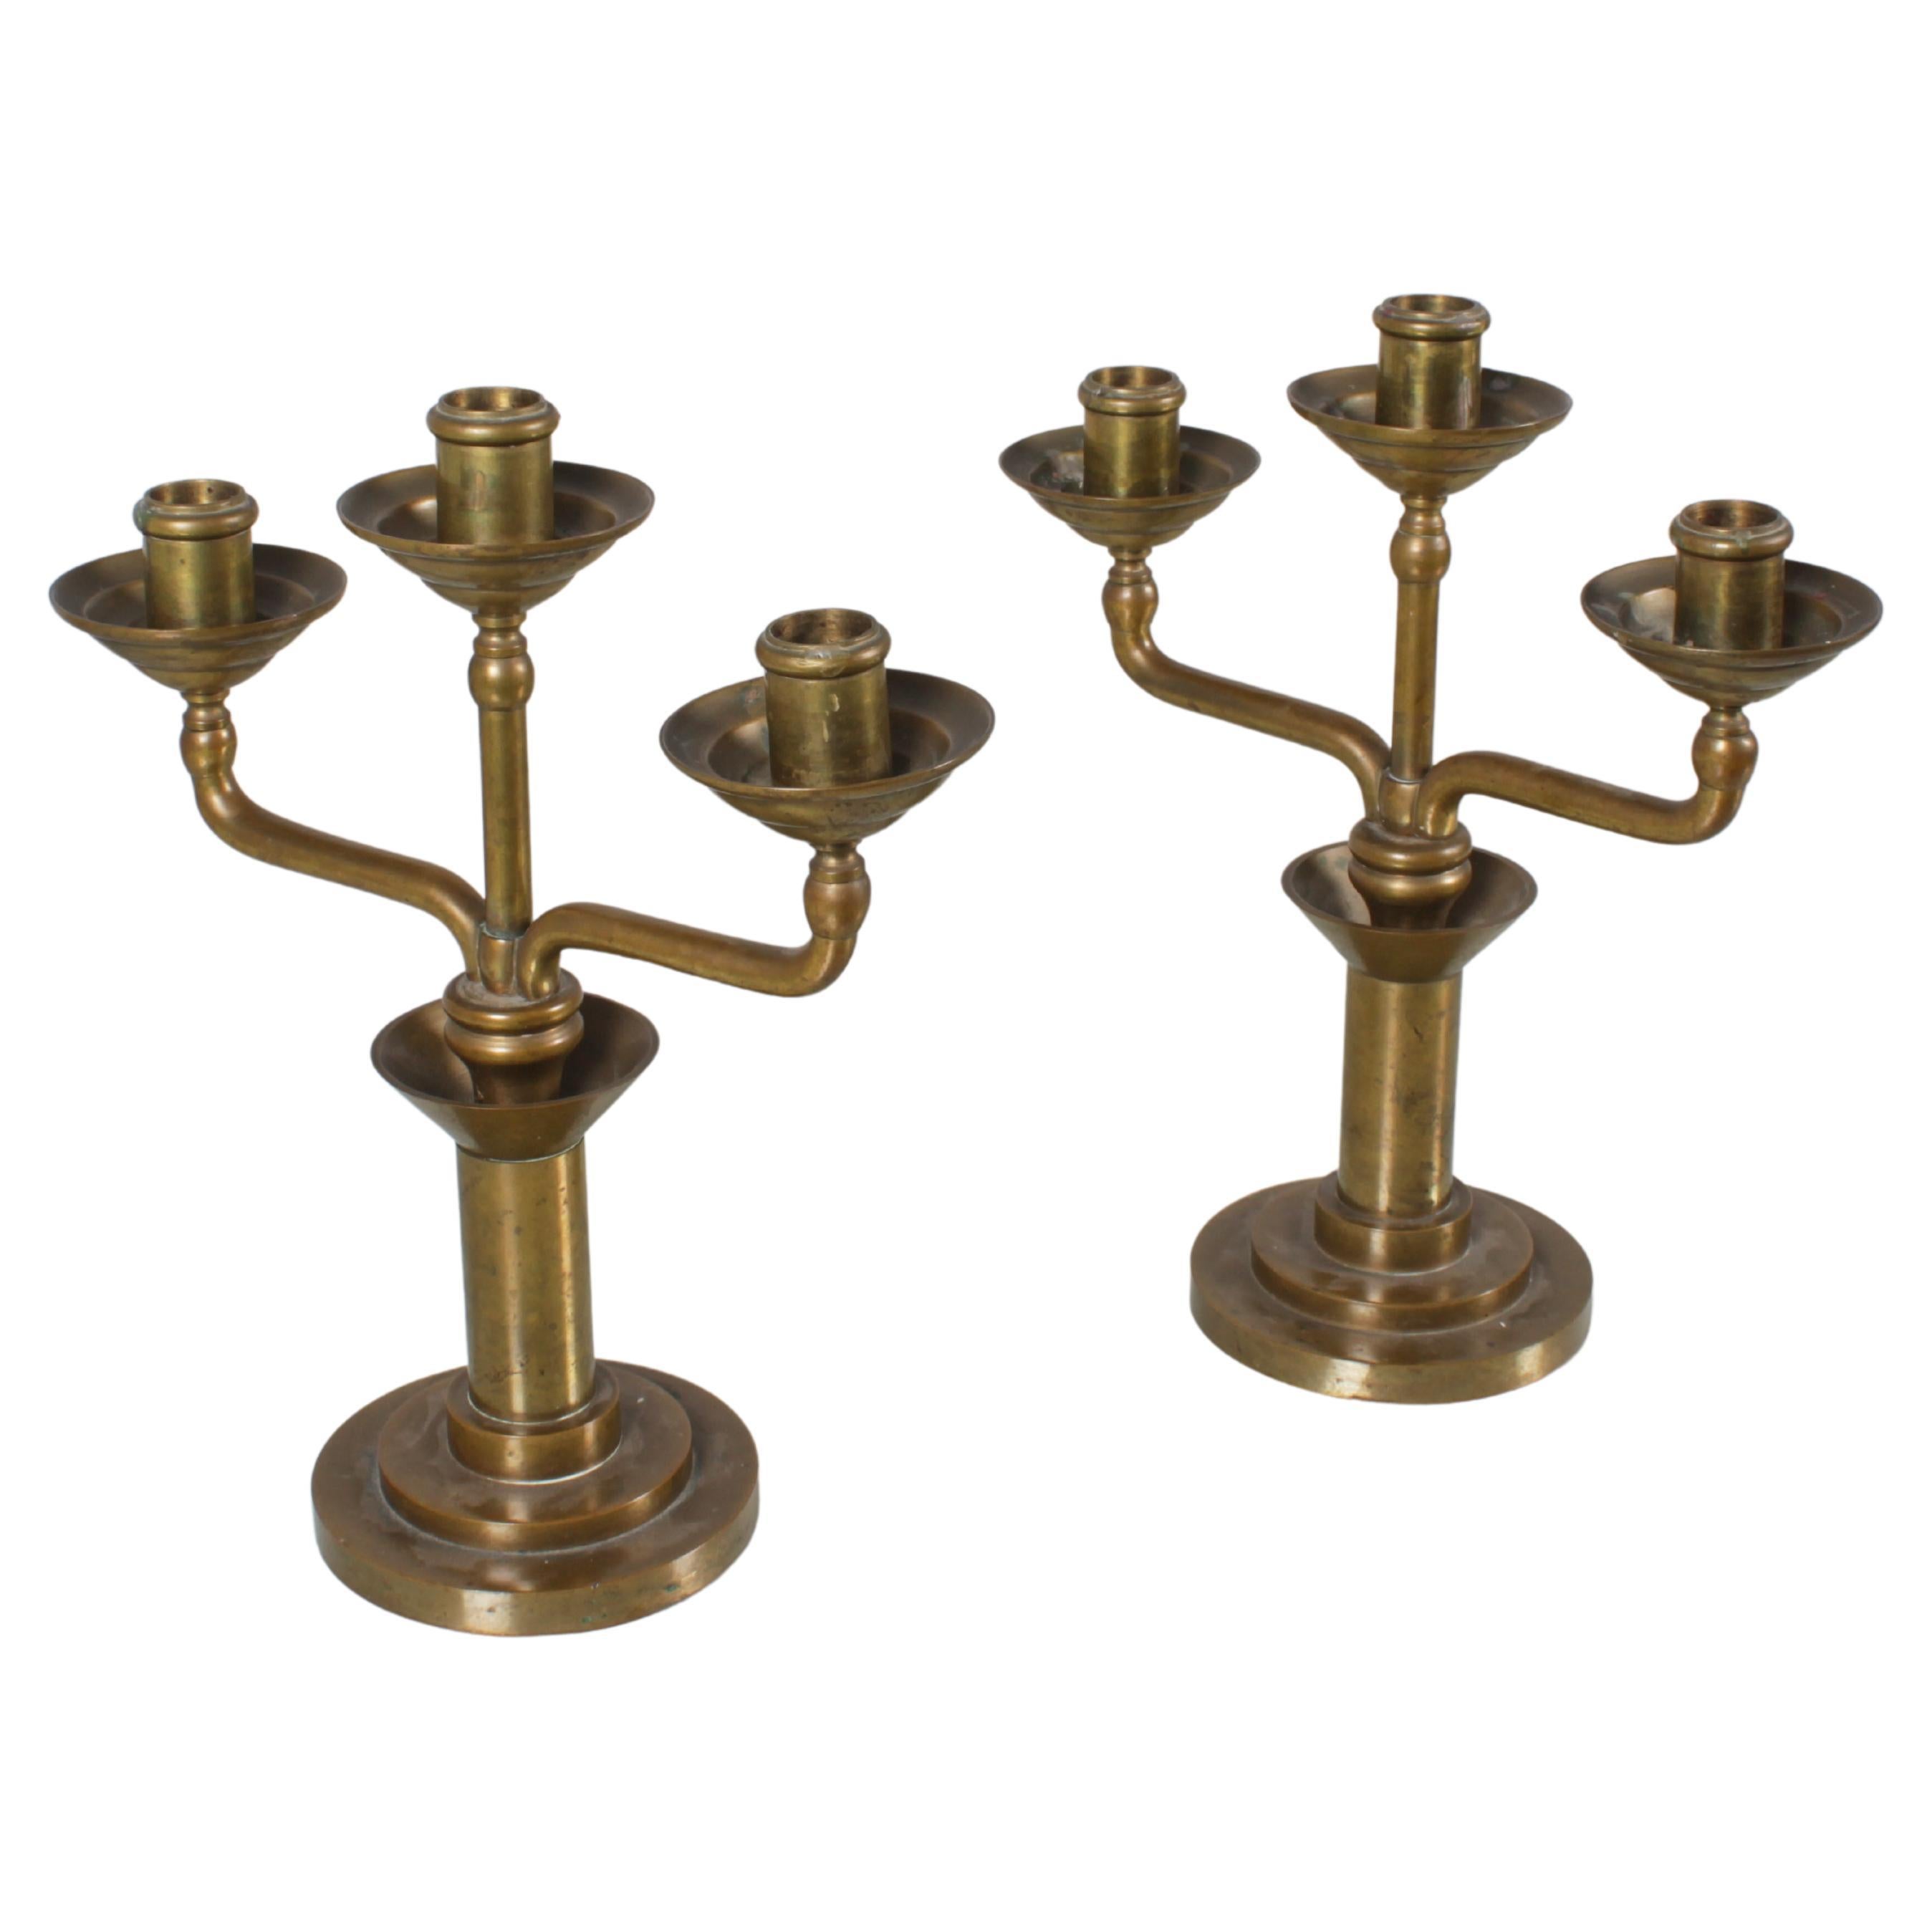 Refined Bauhouse pair of turned solid brass candelabra with two curved lateral arms and a central one. Italian production from the 30s.
Wear consistent with age and use.
 